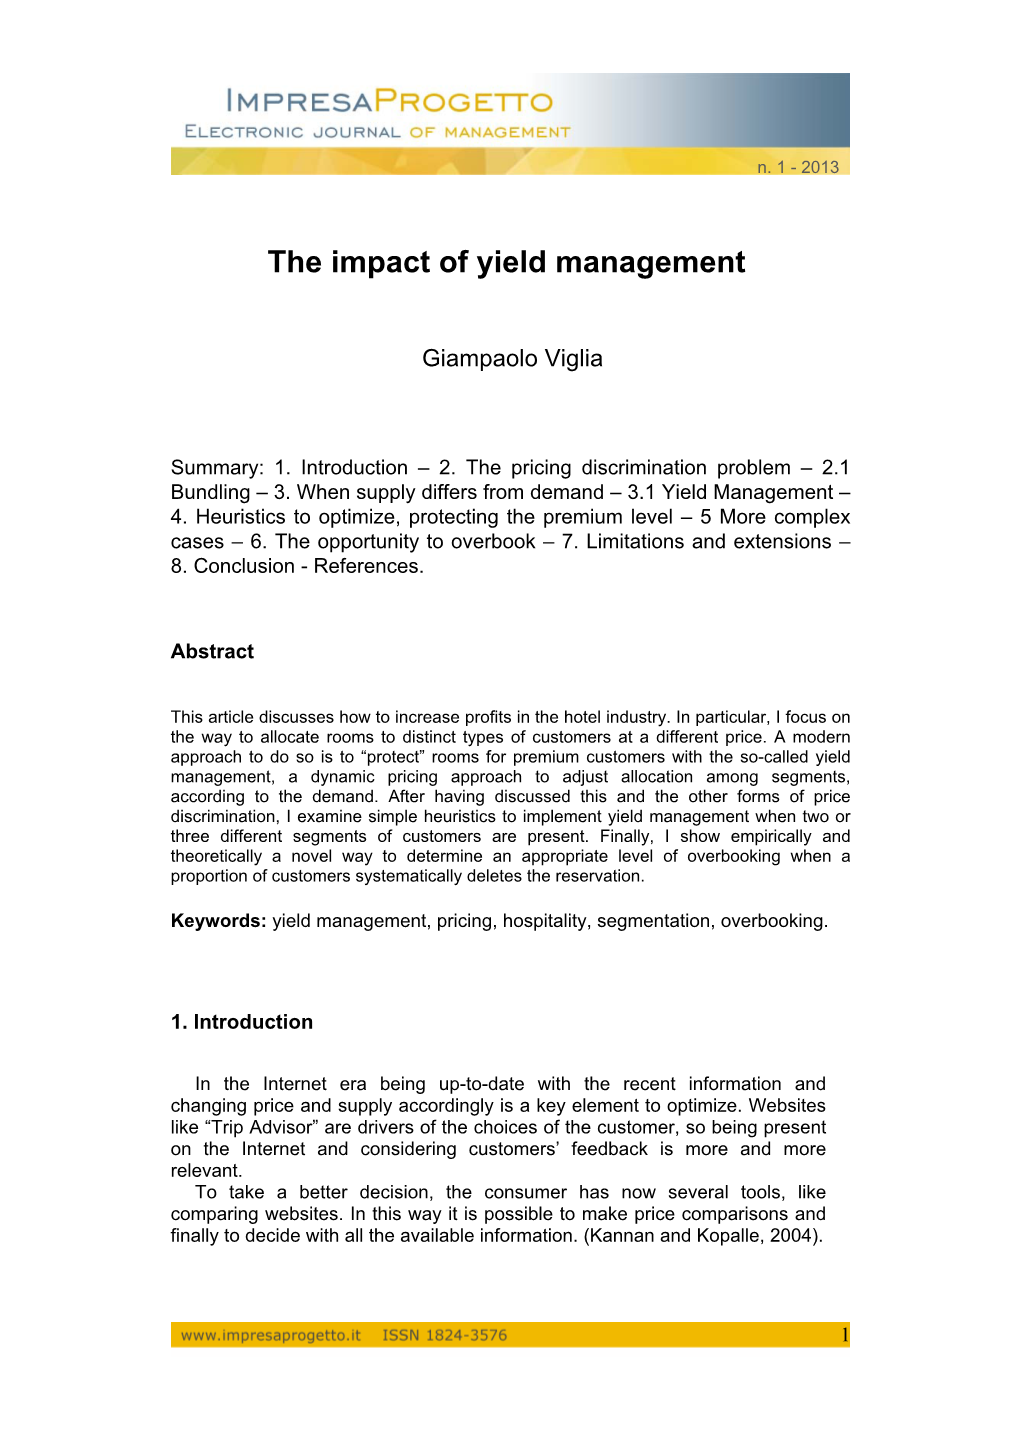 The Impact of Yield Management